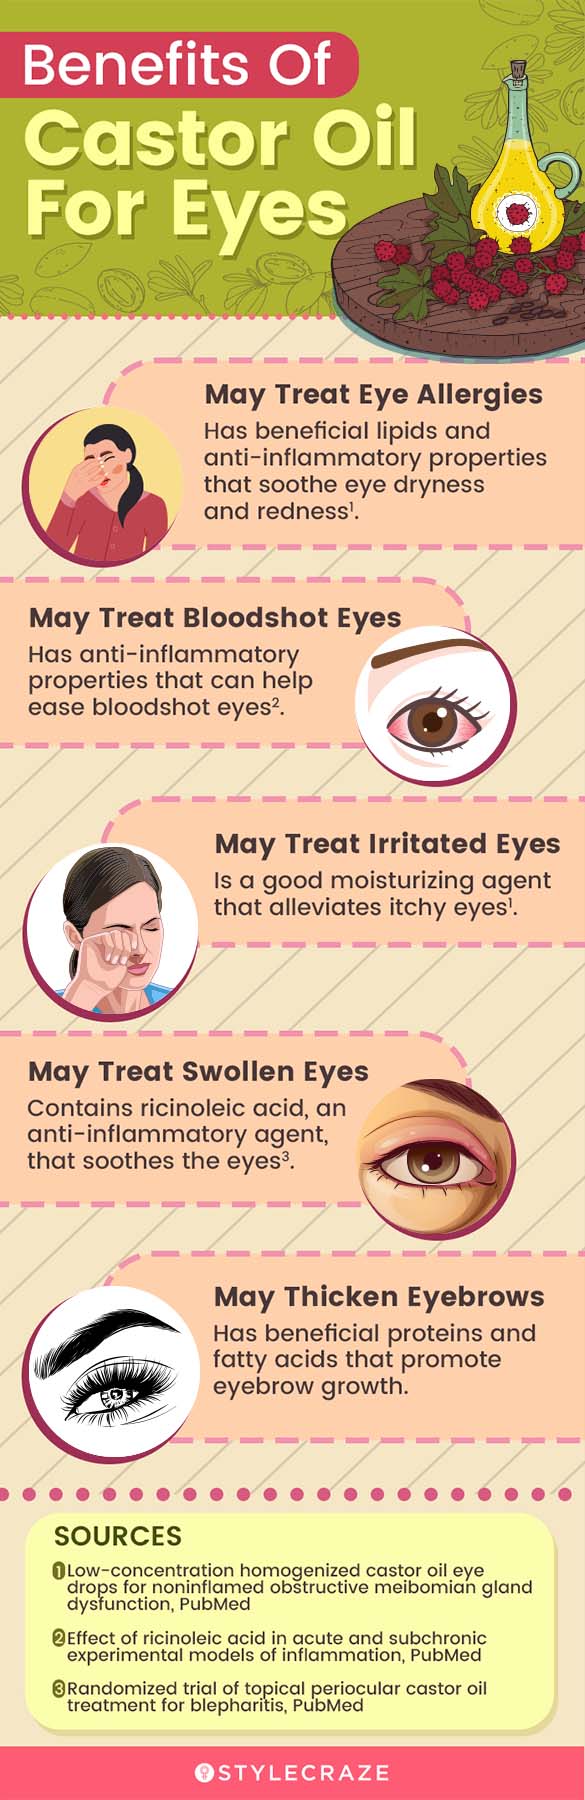 benefits of casrtor oil for eyes (infographic)